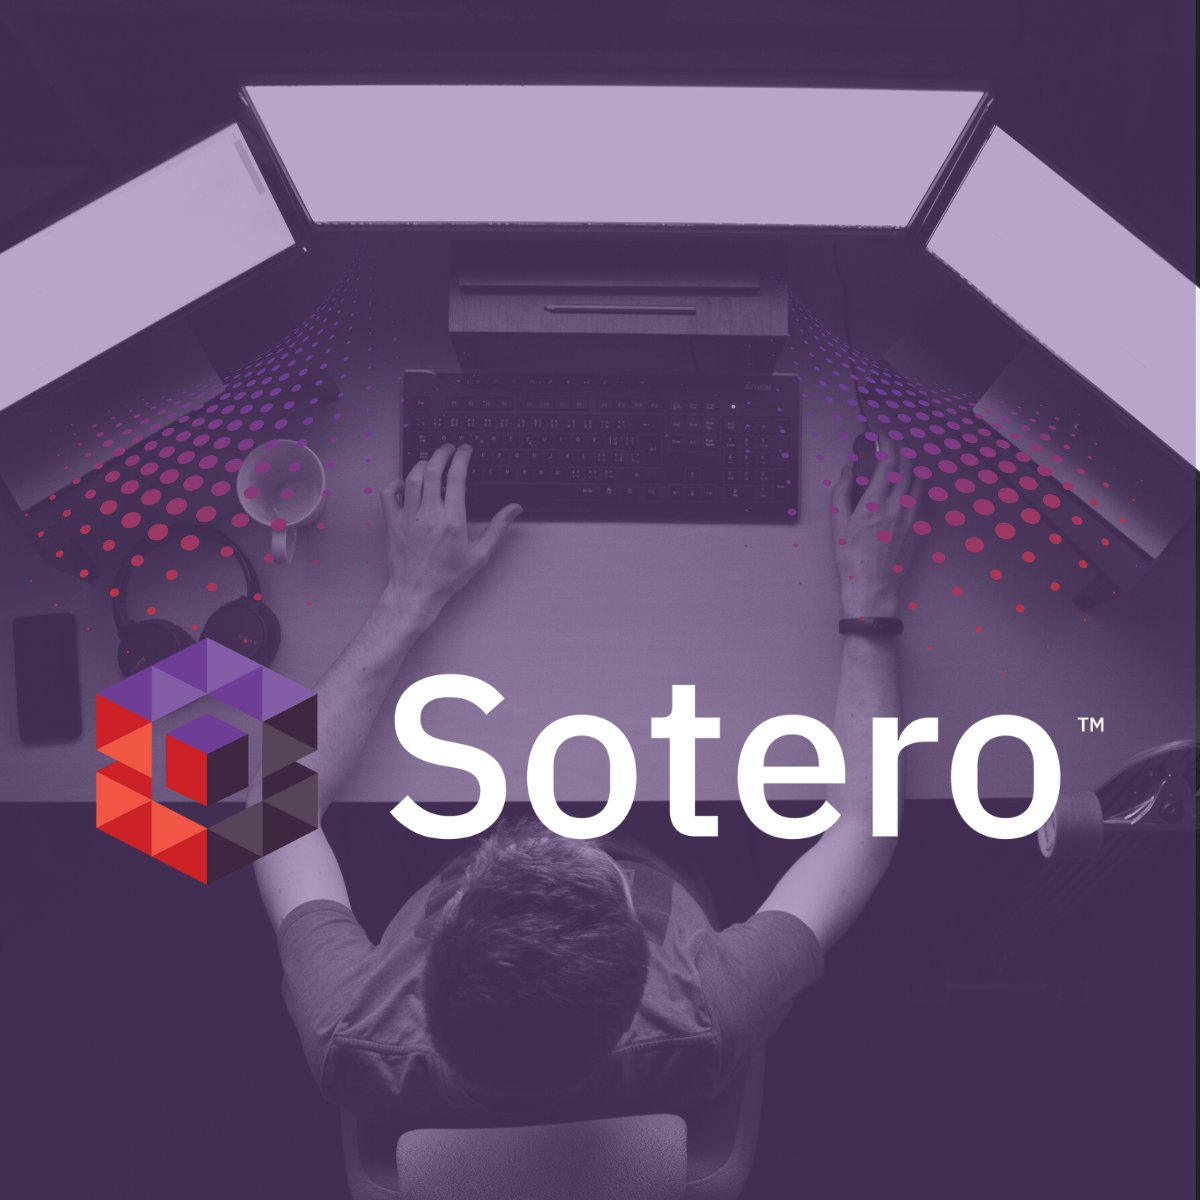 Let us show you how Sotero seamlessly integrates data security & reduces development costs while providing complete protection and control of your data. Schedule your demo today: info.soterosoft.com/sotero-demo-re… #datasecurity #dspm